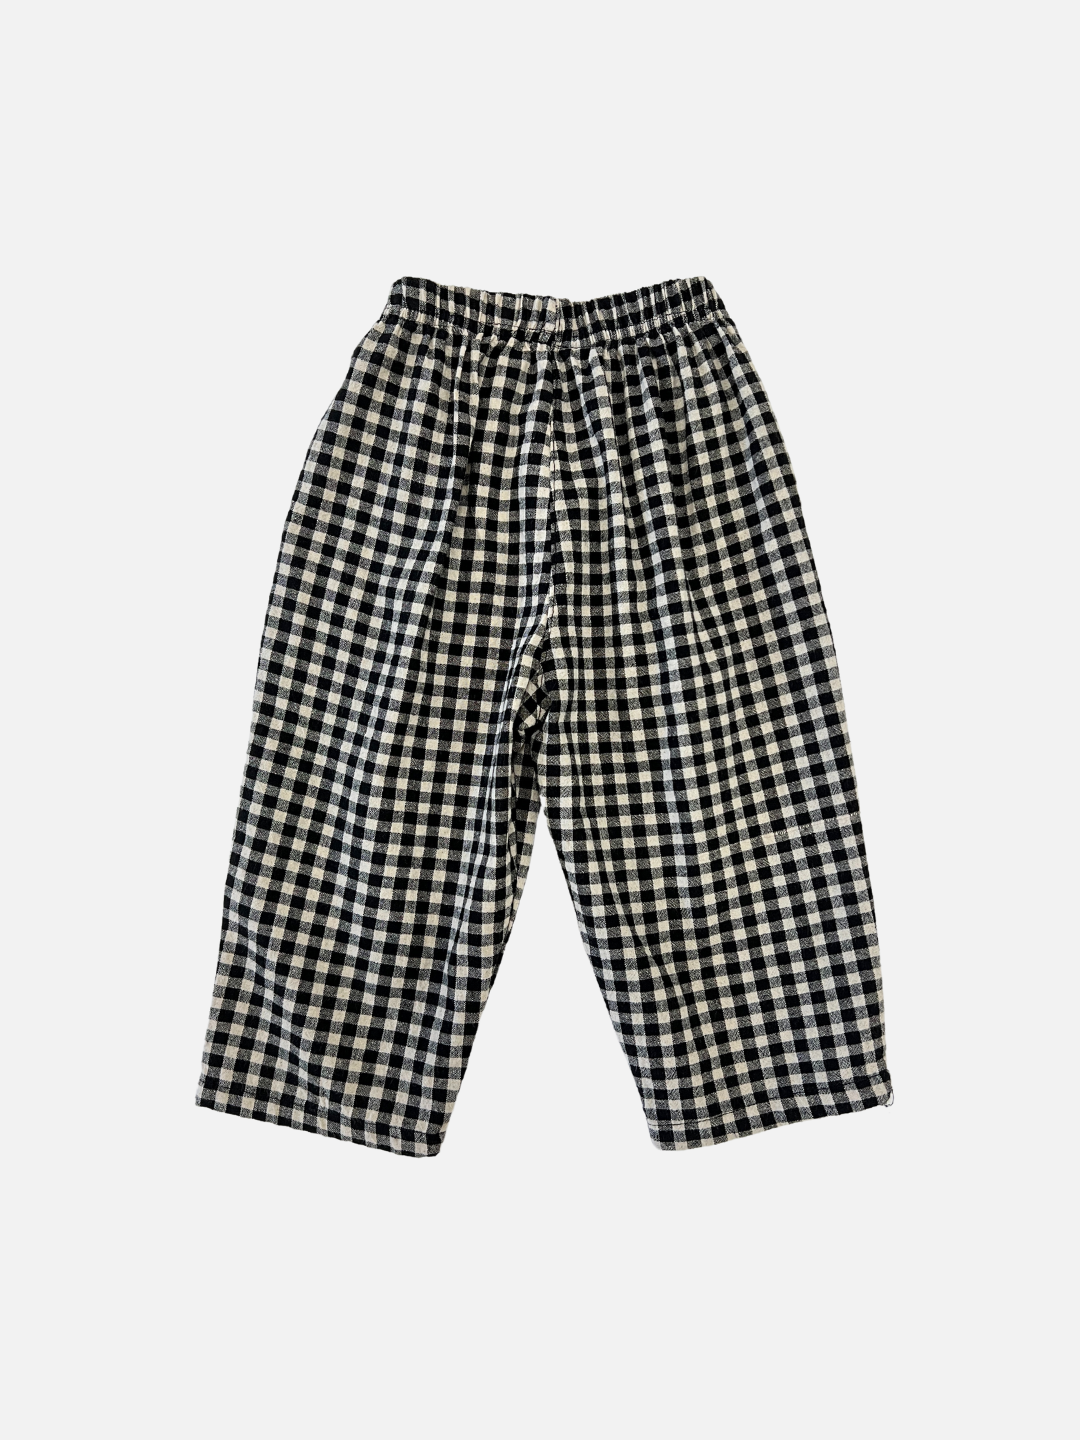 Back view of kids black and off-white gingham check pants.